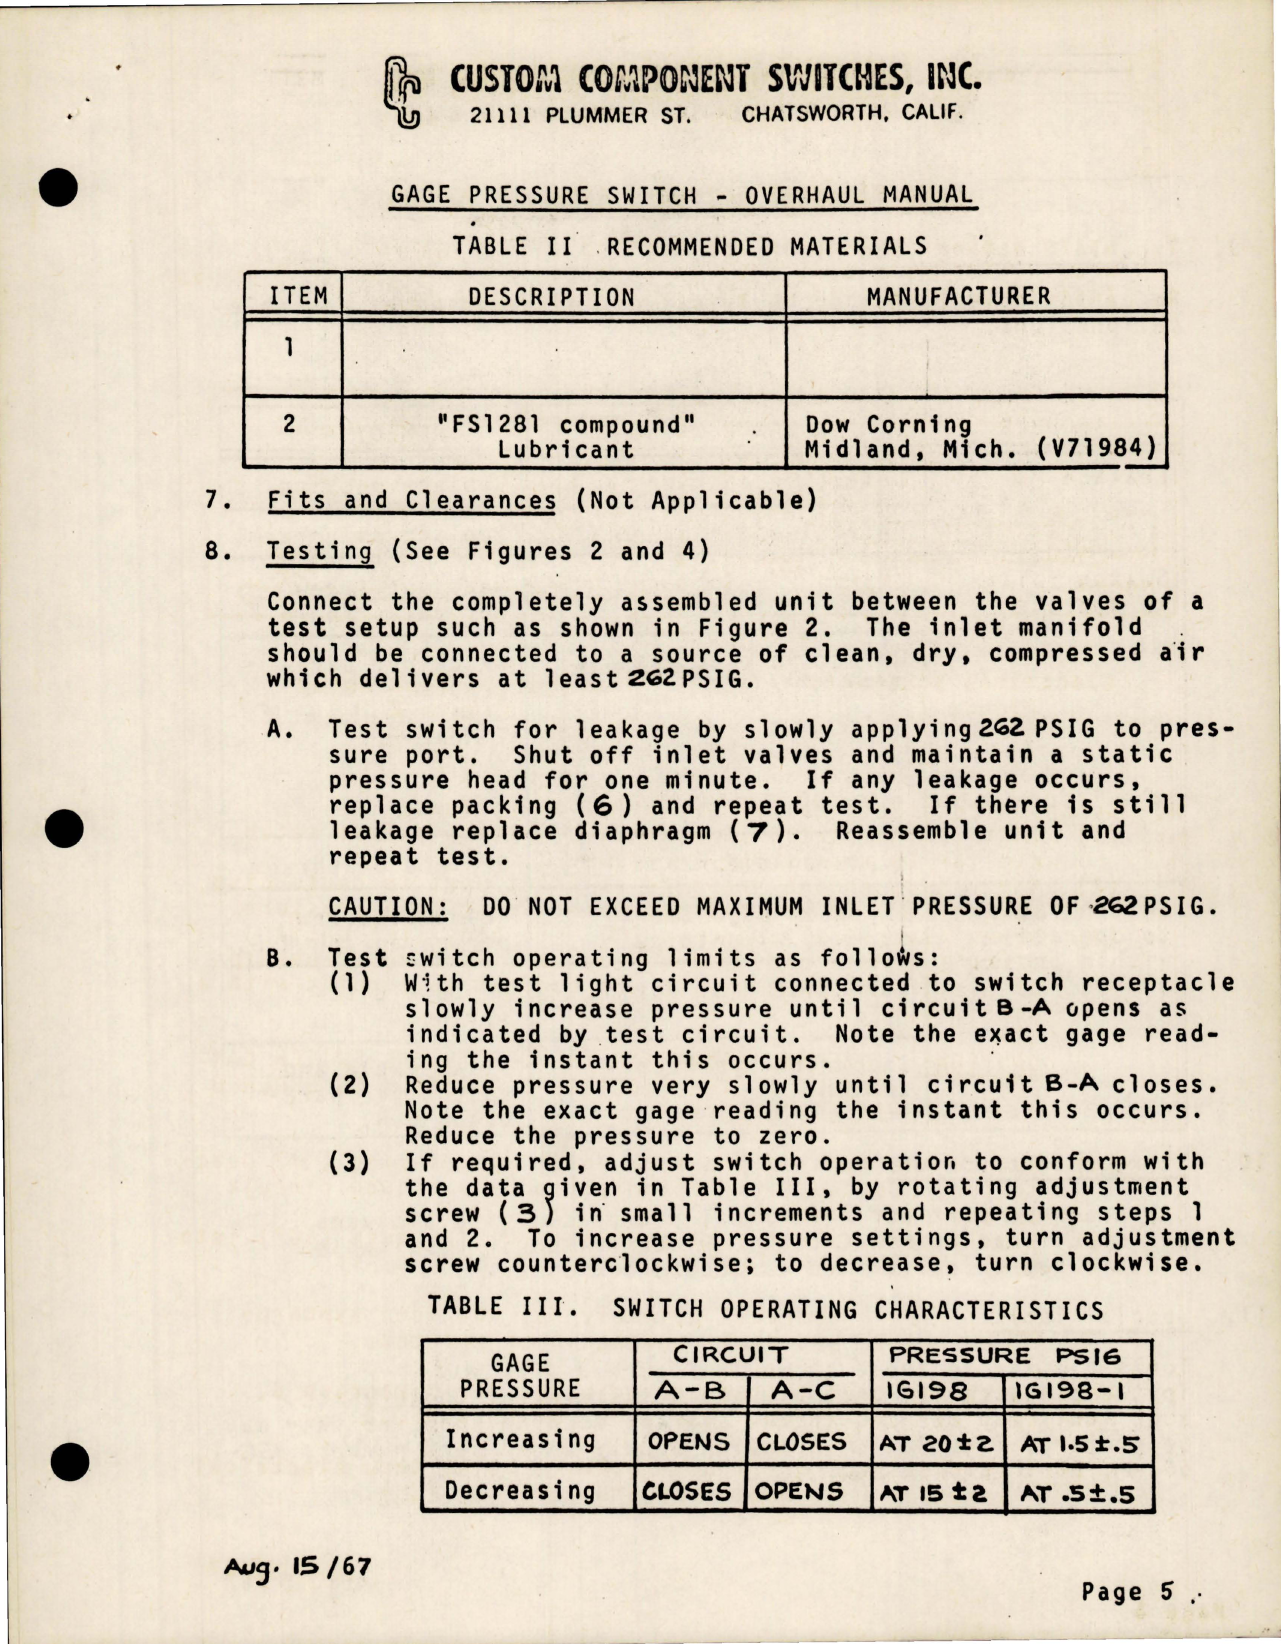 Sample page 5 from AirCorps Library document: Overhaul Instructions for Gage Pressure Switch - Part 1G198 and 1G198-1 